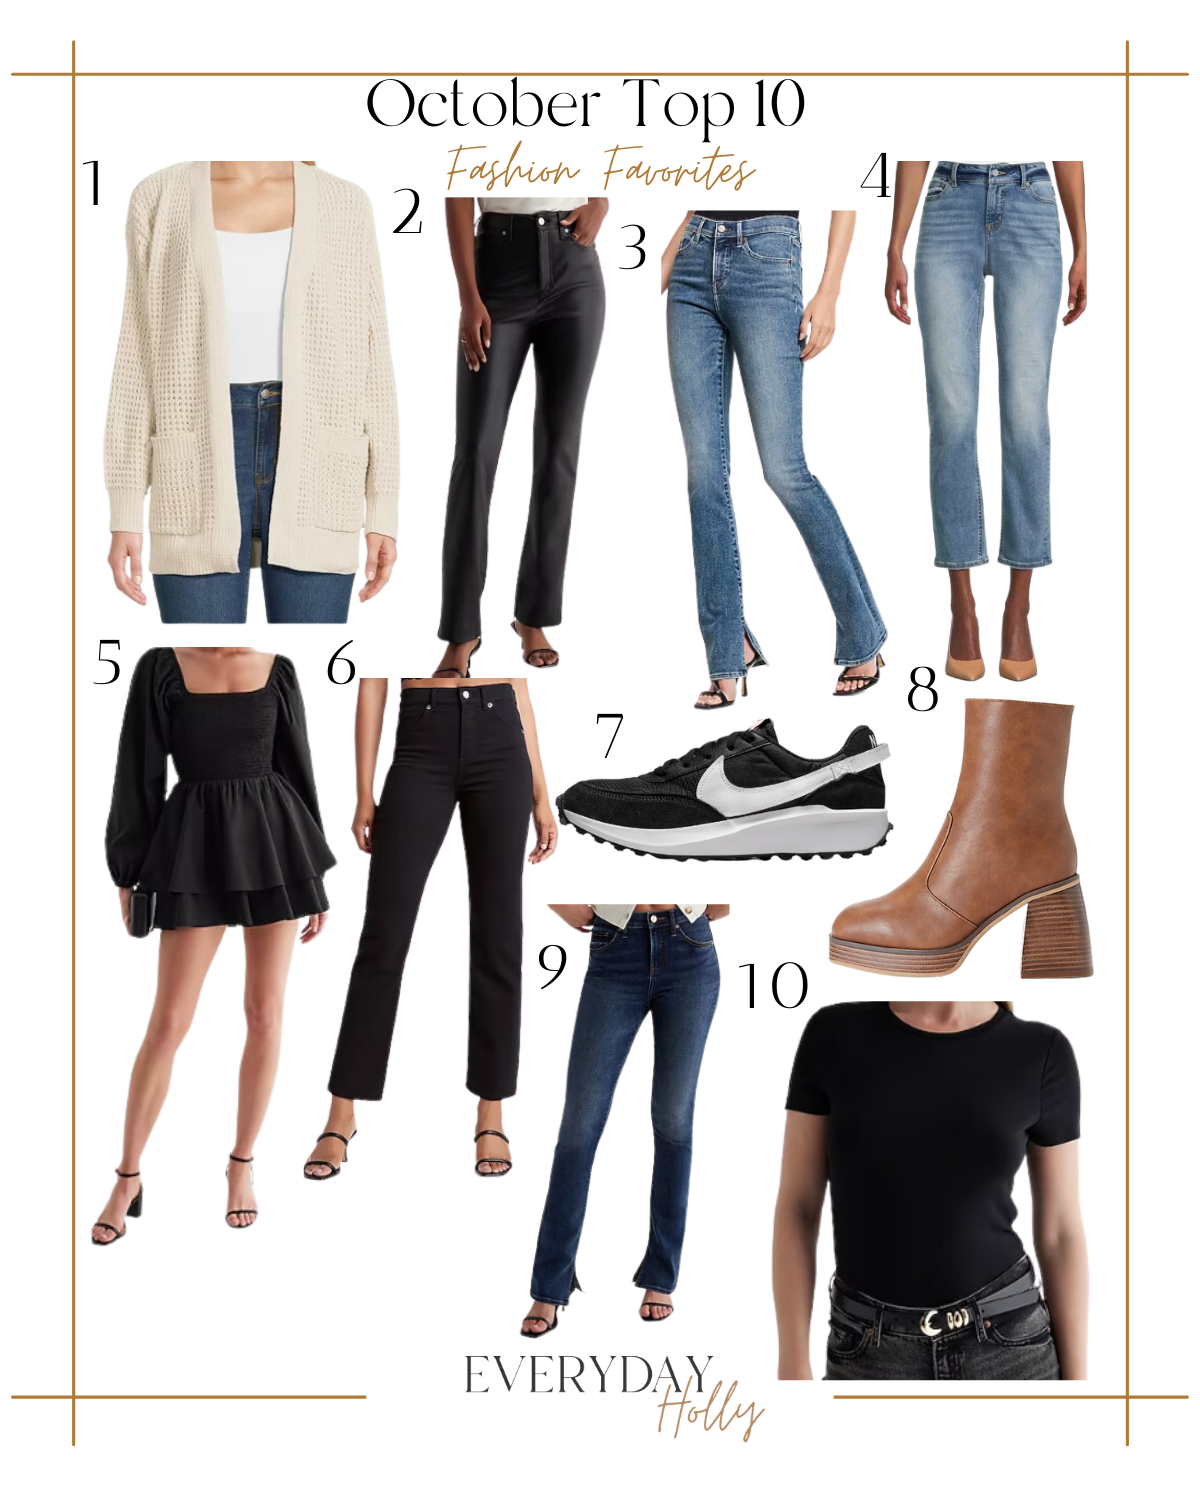 top 10 hottest best sellers from october | #top10 #bestseller #october #cardigan #fauxleather #jeans #denim #sneakers #nike #platform #boots #romper #ankle #walmart #nike #maurices #express